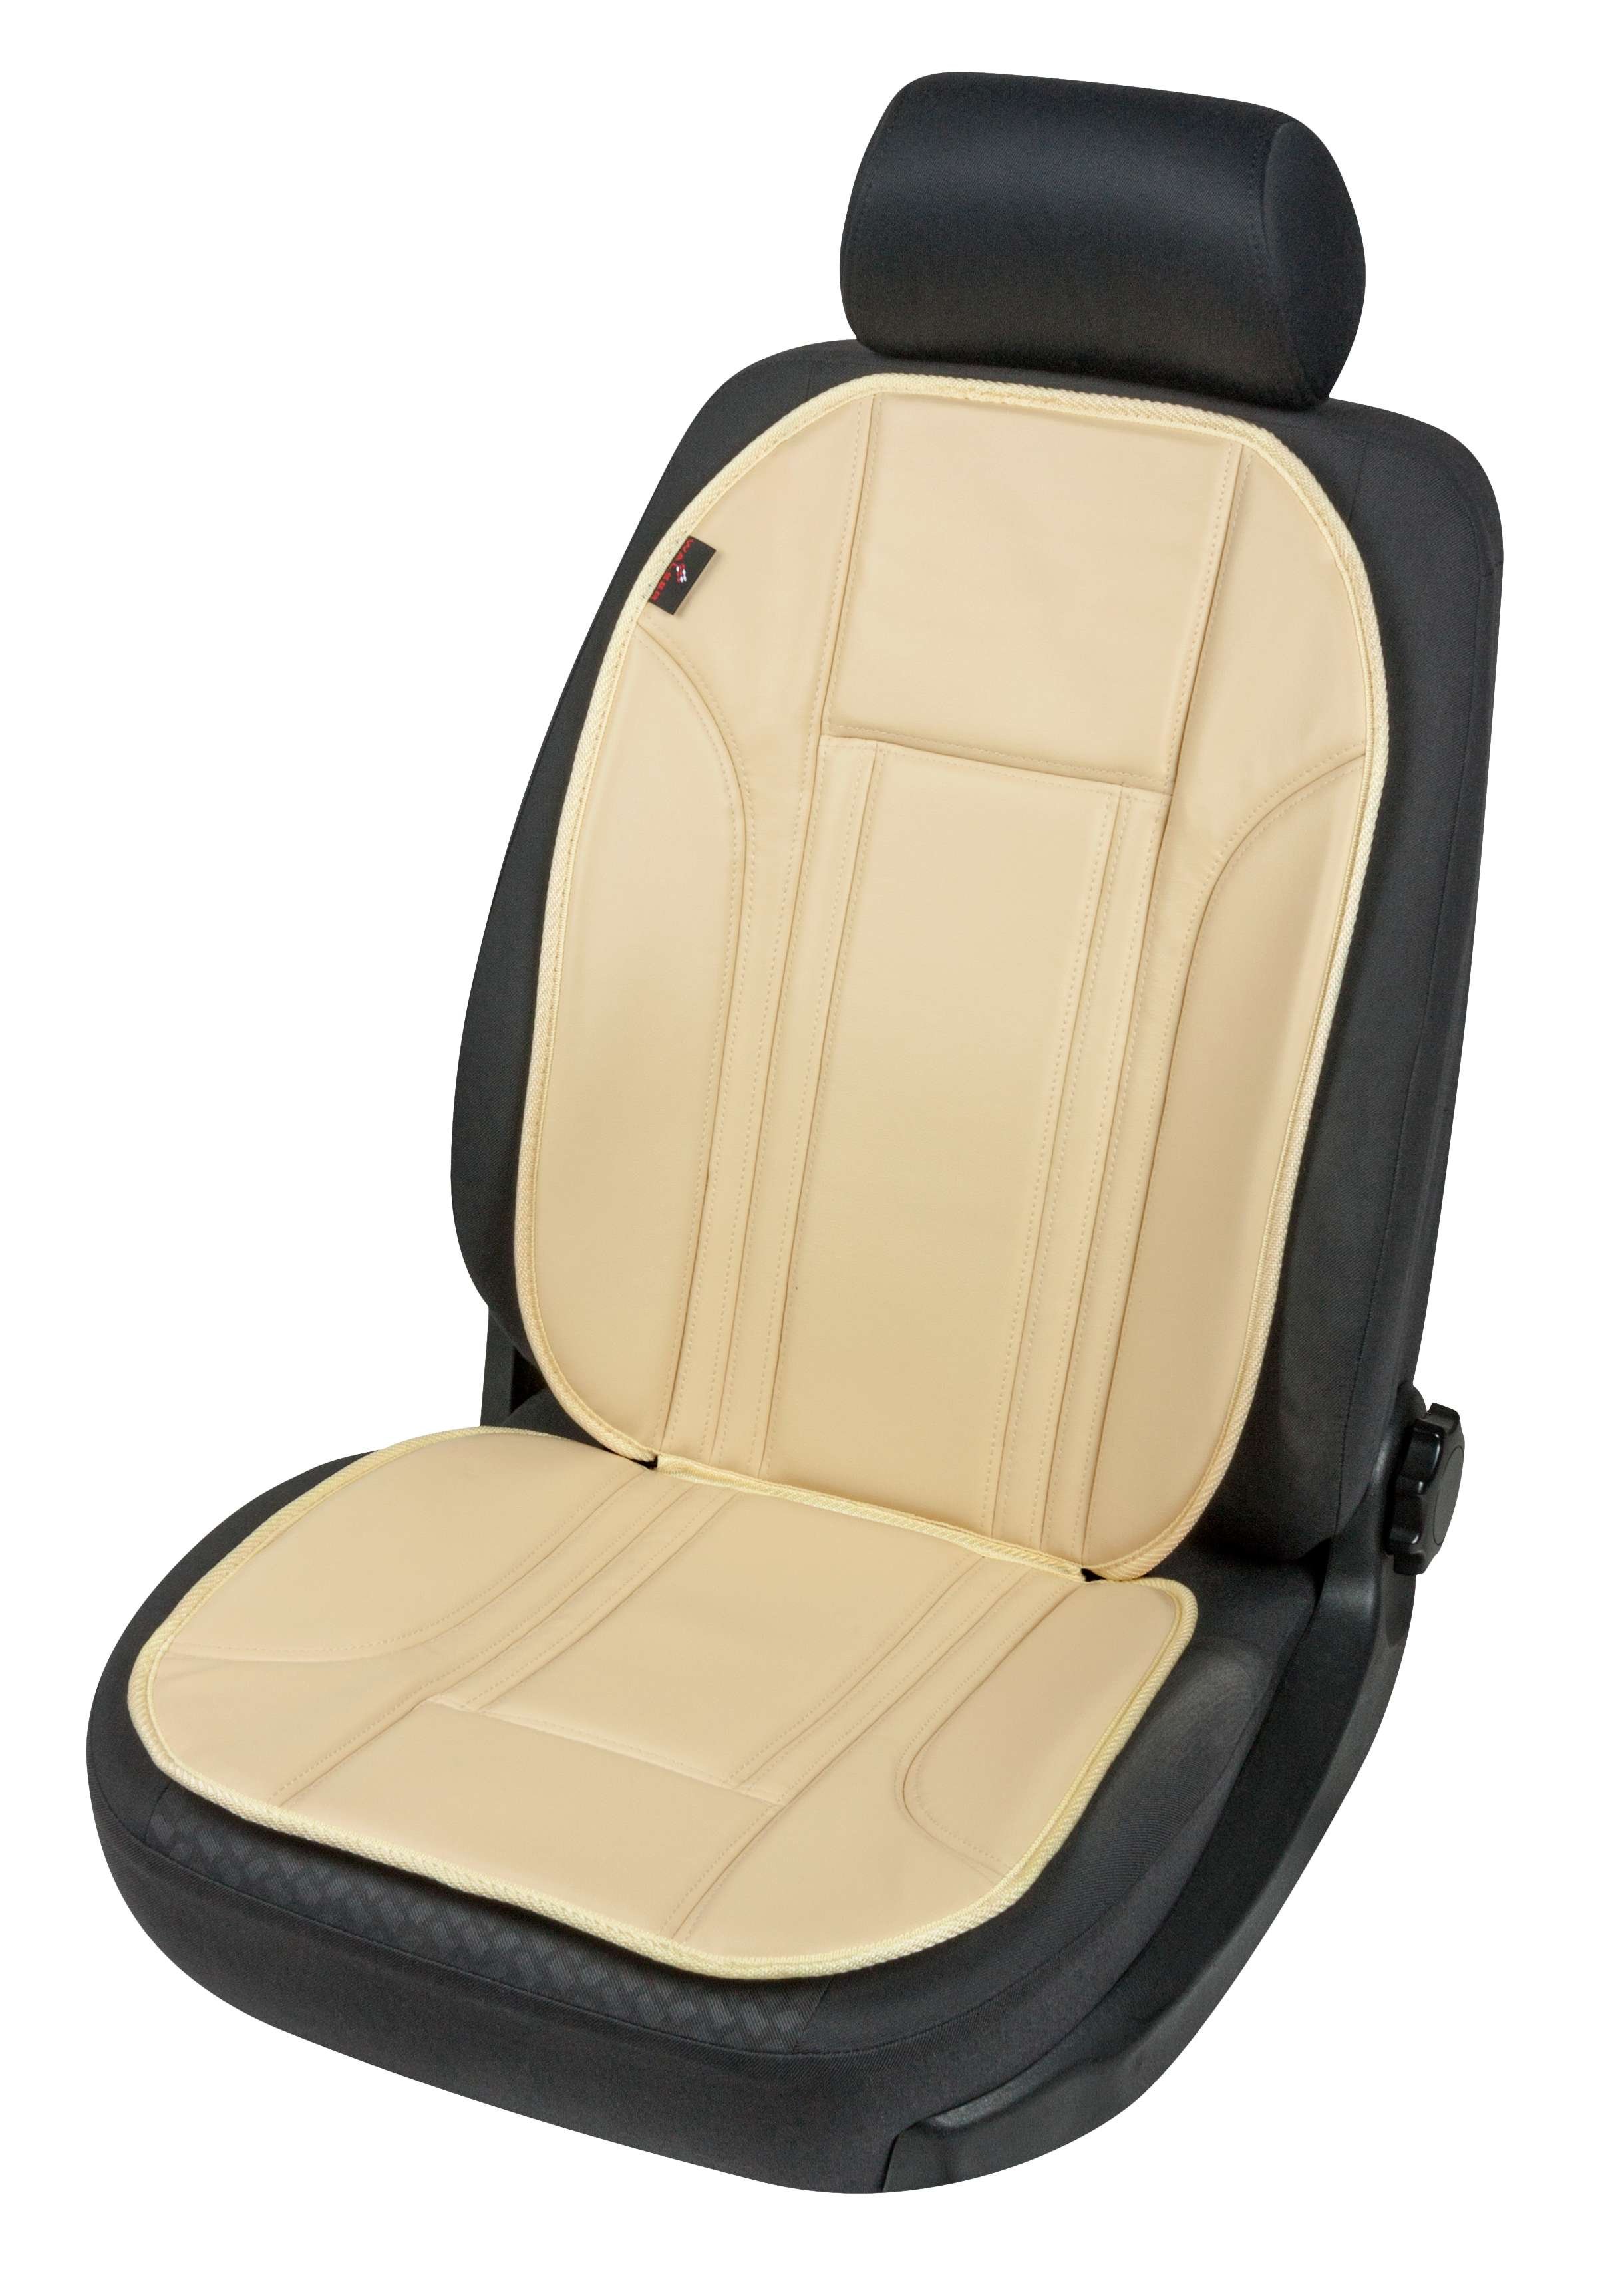 Car Seat cover in imitation leather Ravenna beige